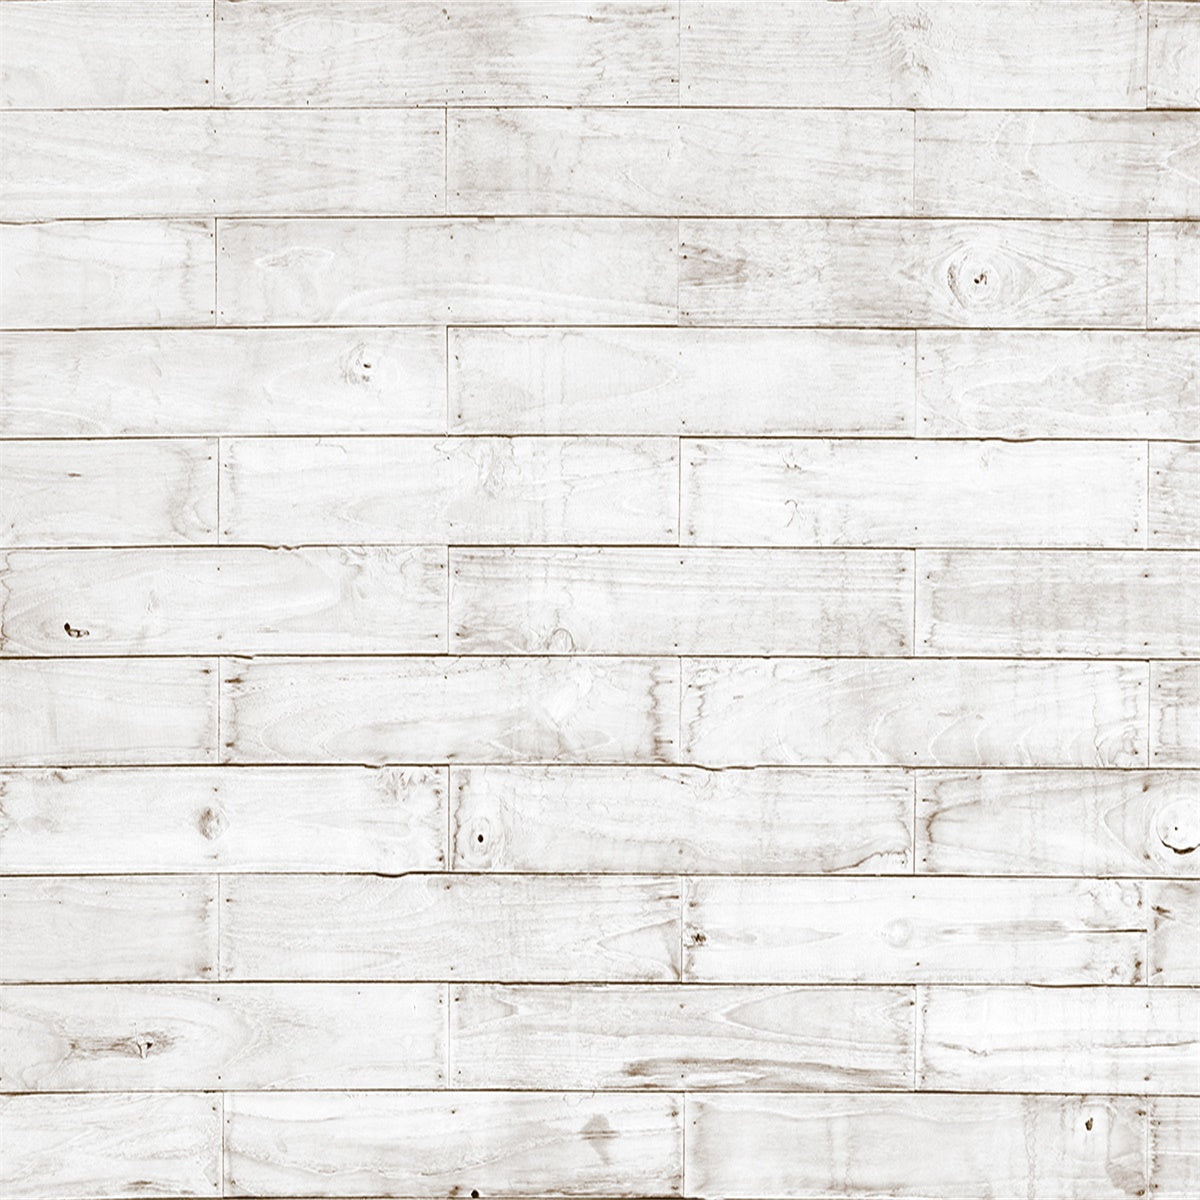 Wooden Wall Vintage Photography Backdrops